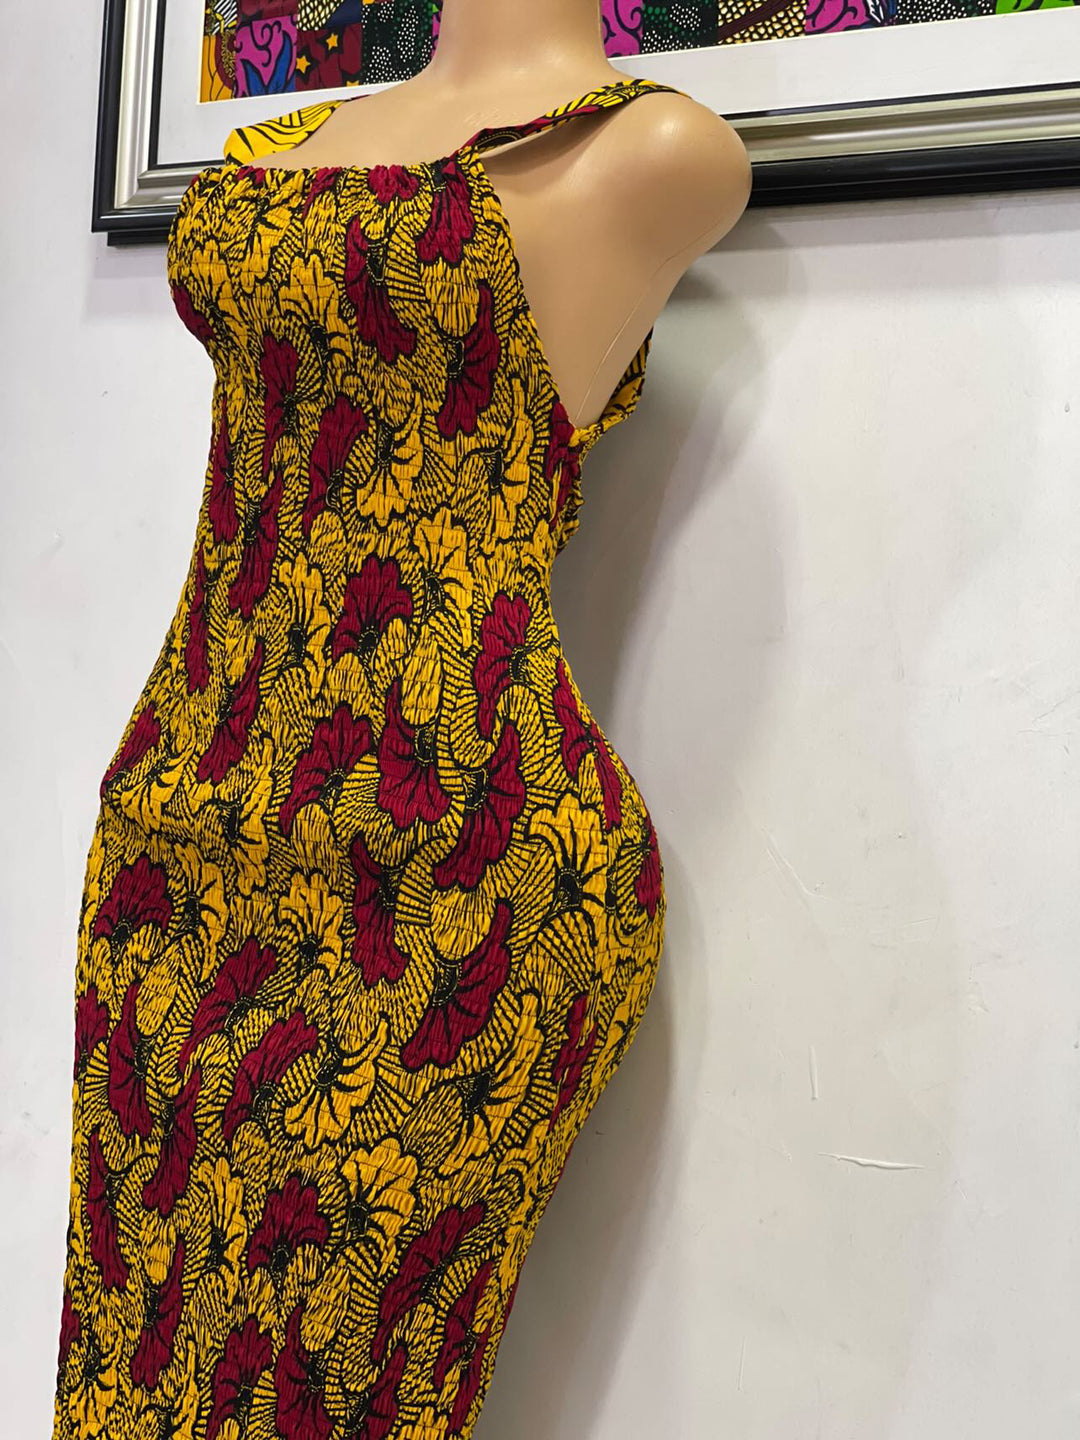 African print stretchy bodycon dress.💥